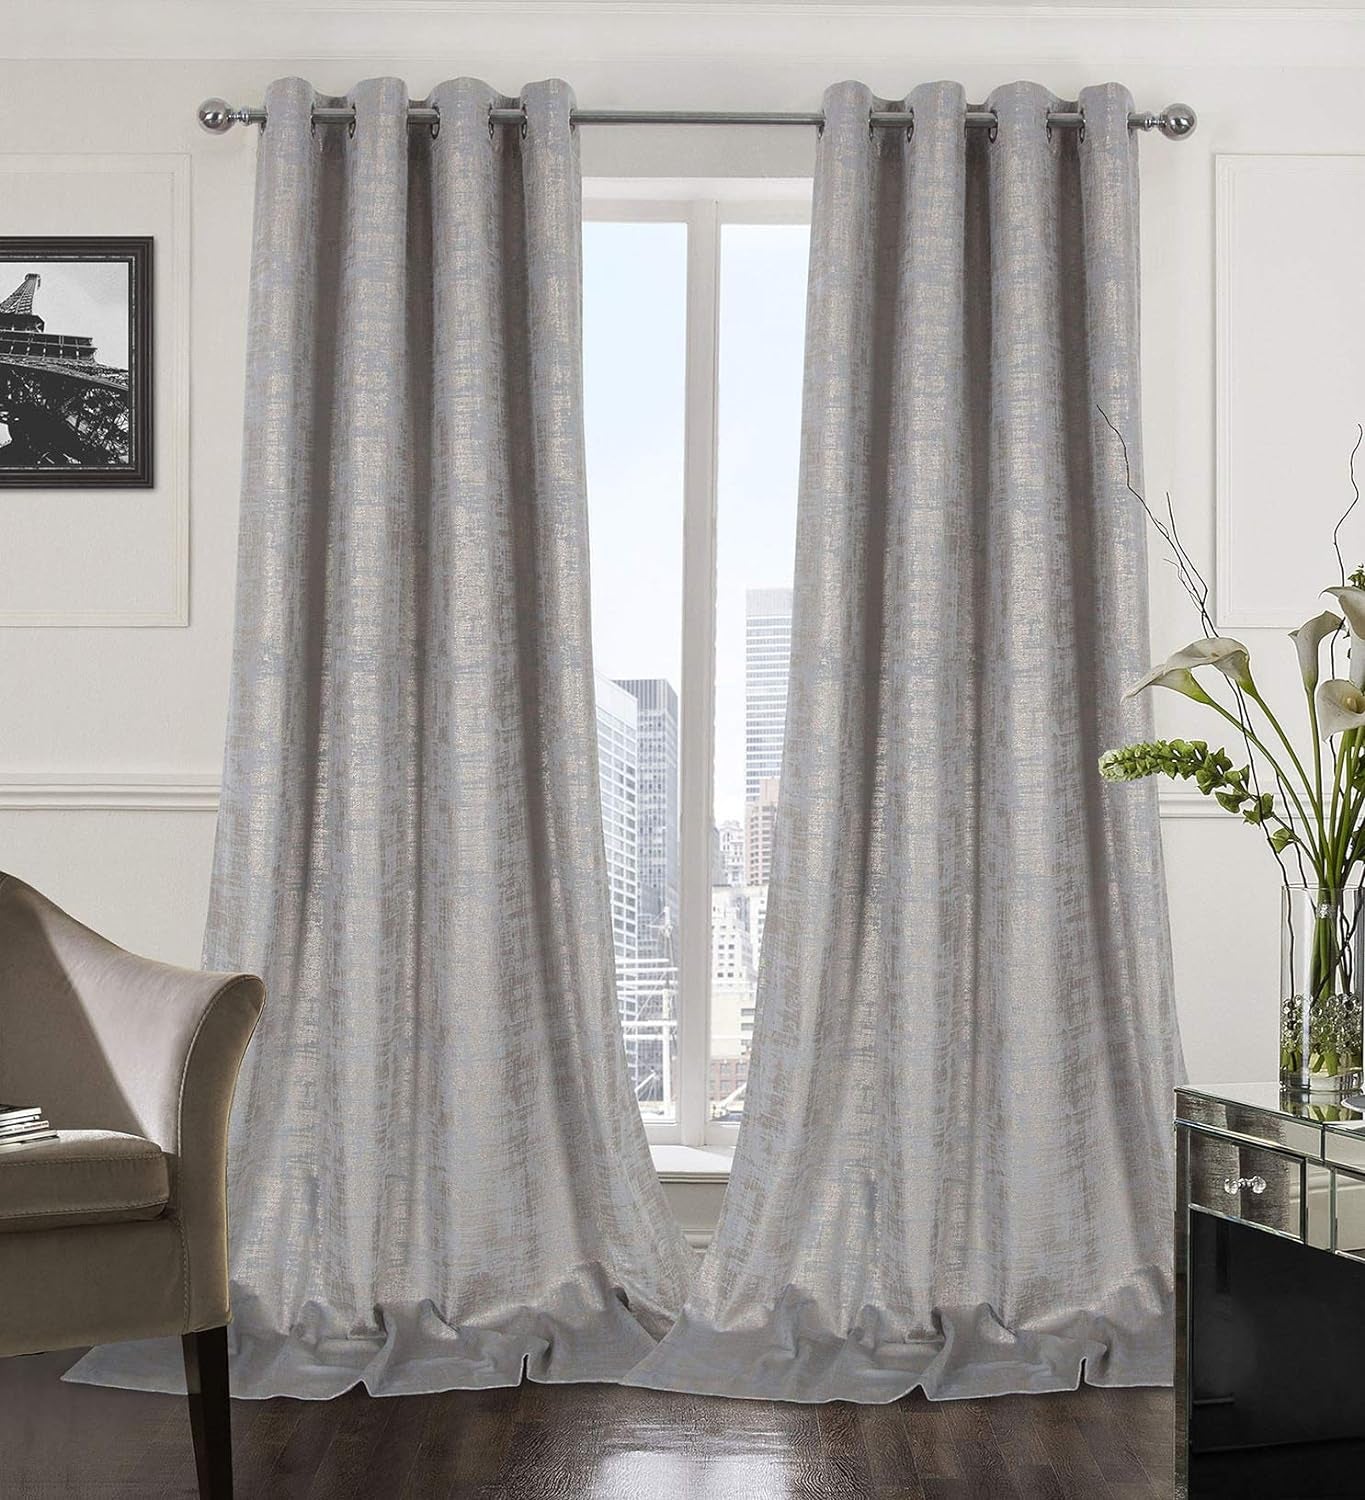 Always4U Soft Velvet Curtains 95 Inch Length Luxury Bedroom Curtains Gold Foil Print Window Curtains for Living Room 1 Panel White  always4u Silver (Gold Print) 2 Panels: 52''W*108''L 